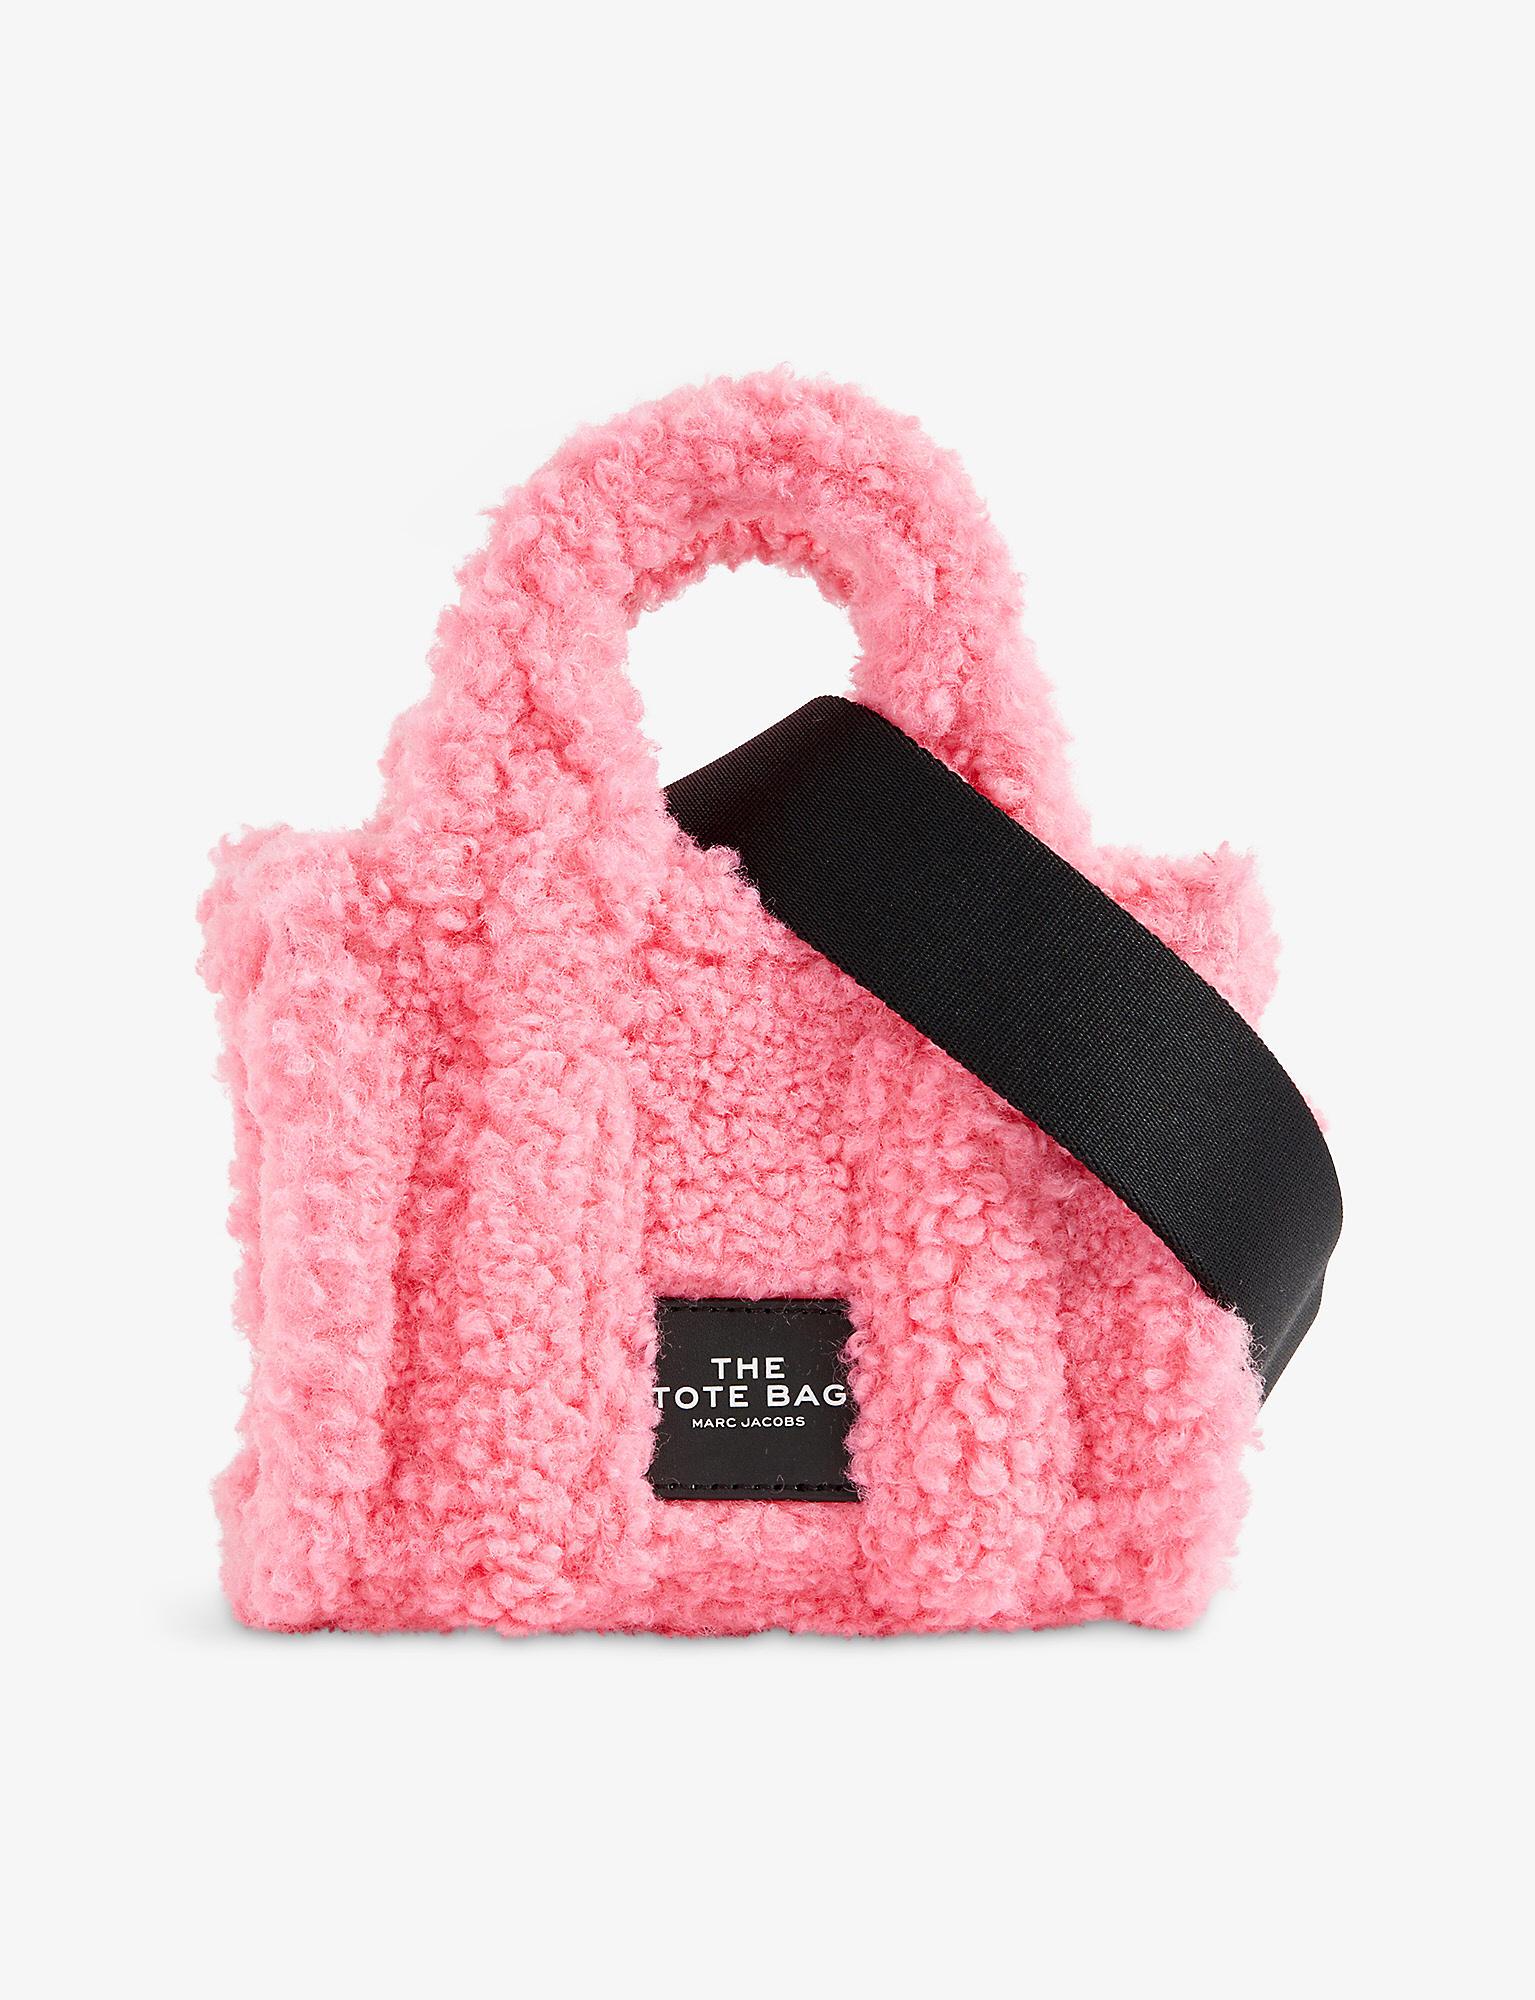 marc jacobs tote bag pink fluffy